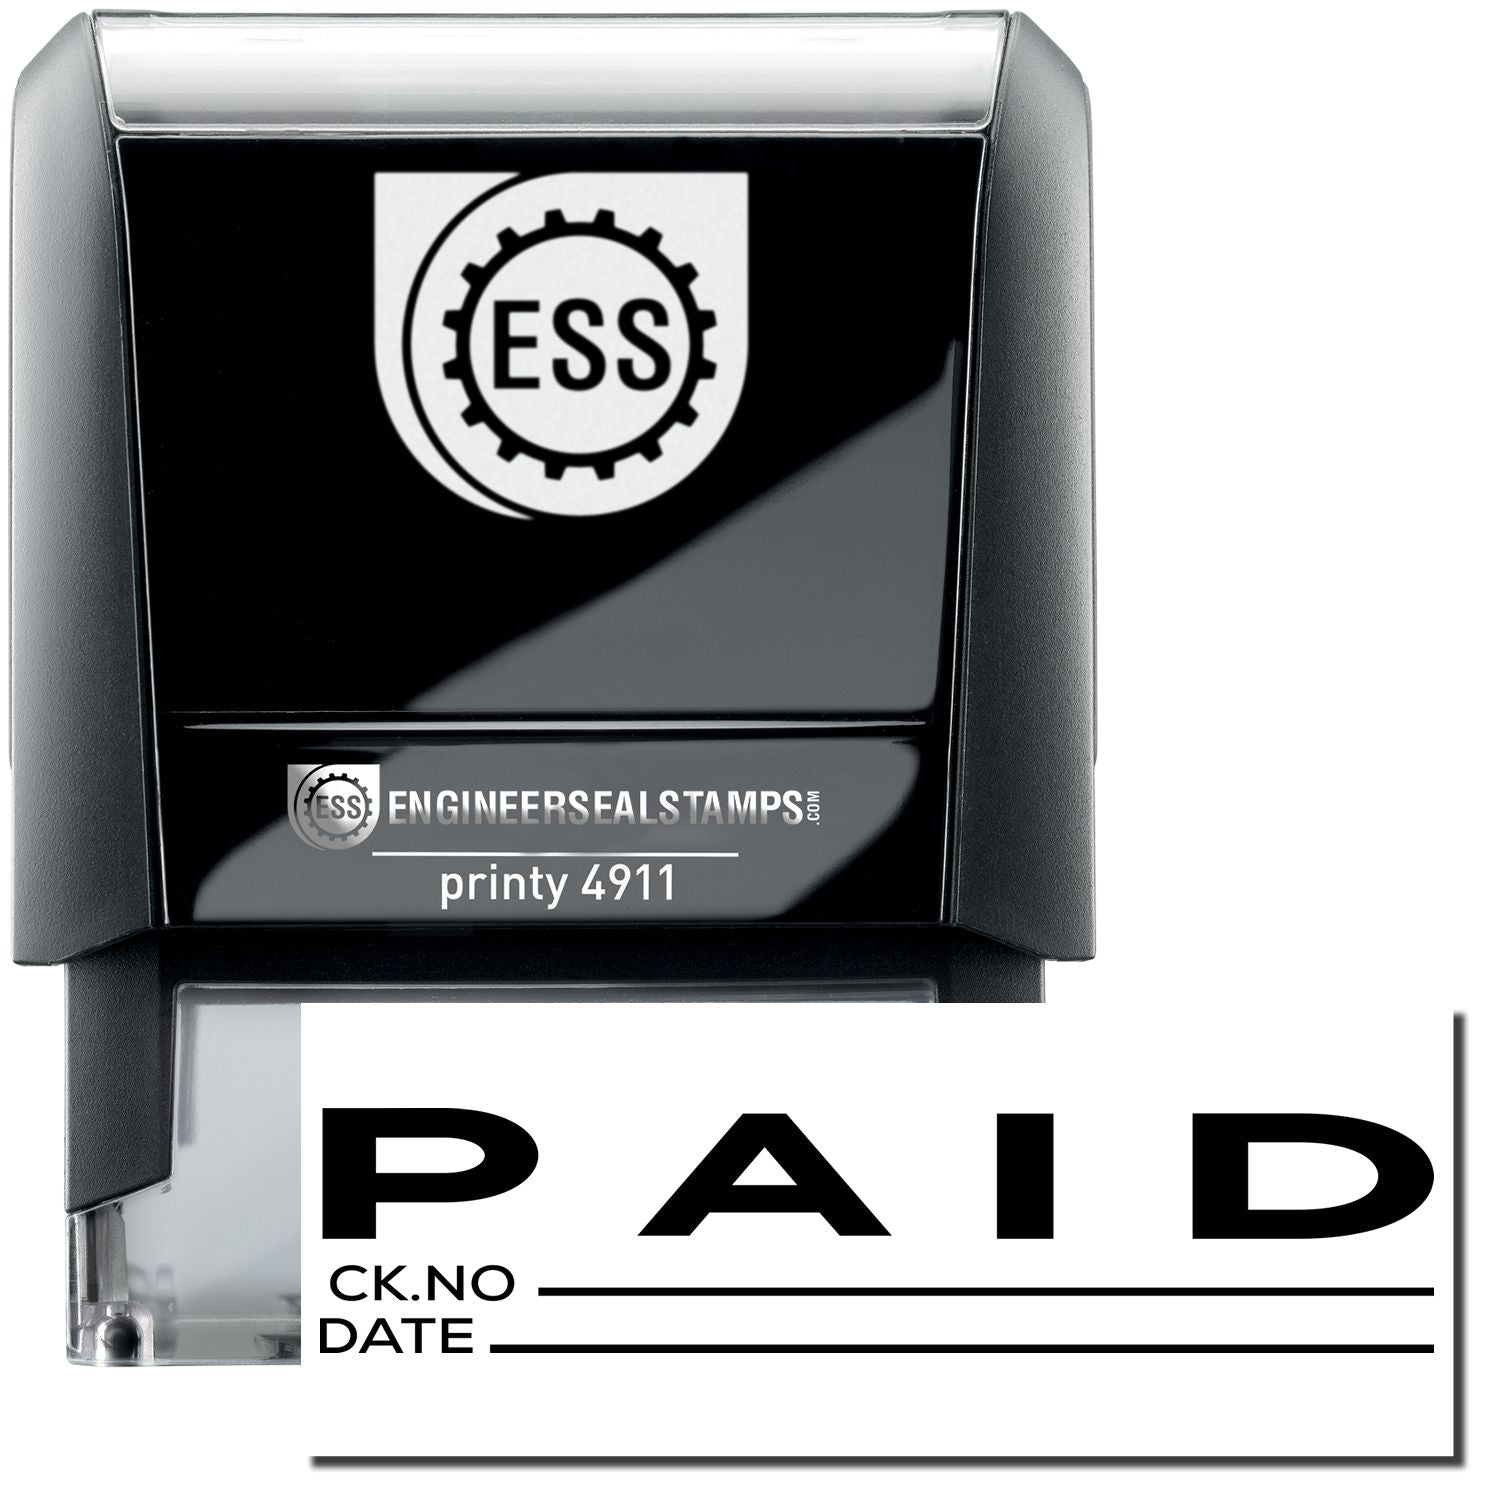 A self-inking stamp with a stamped image showing how the text "PAID" (with a space for writing down both the check number used for the payment and the date when payment was made) is displayed after stamping.